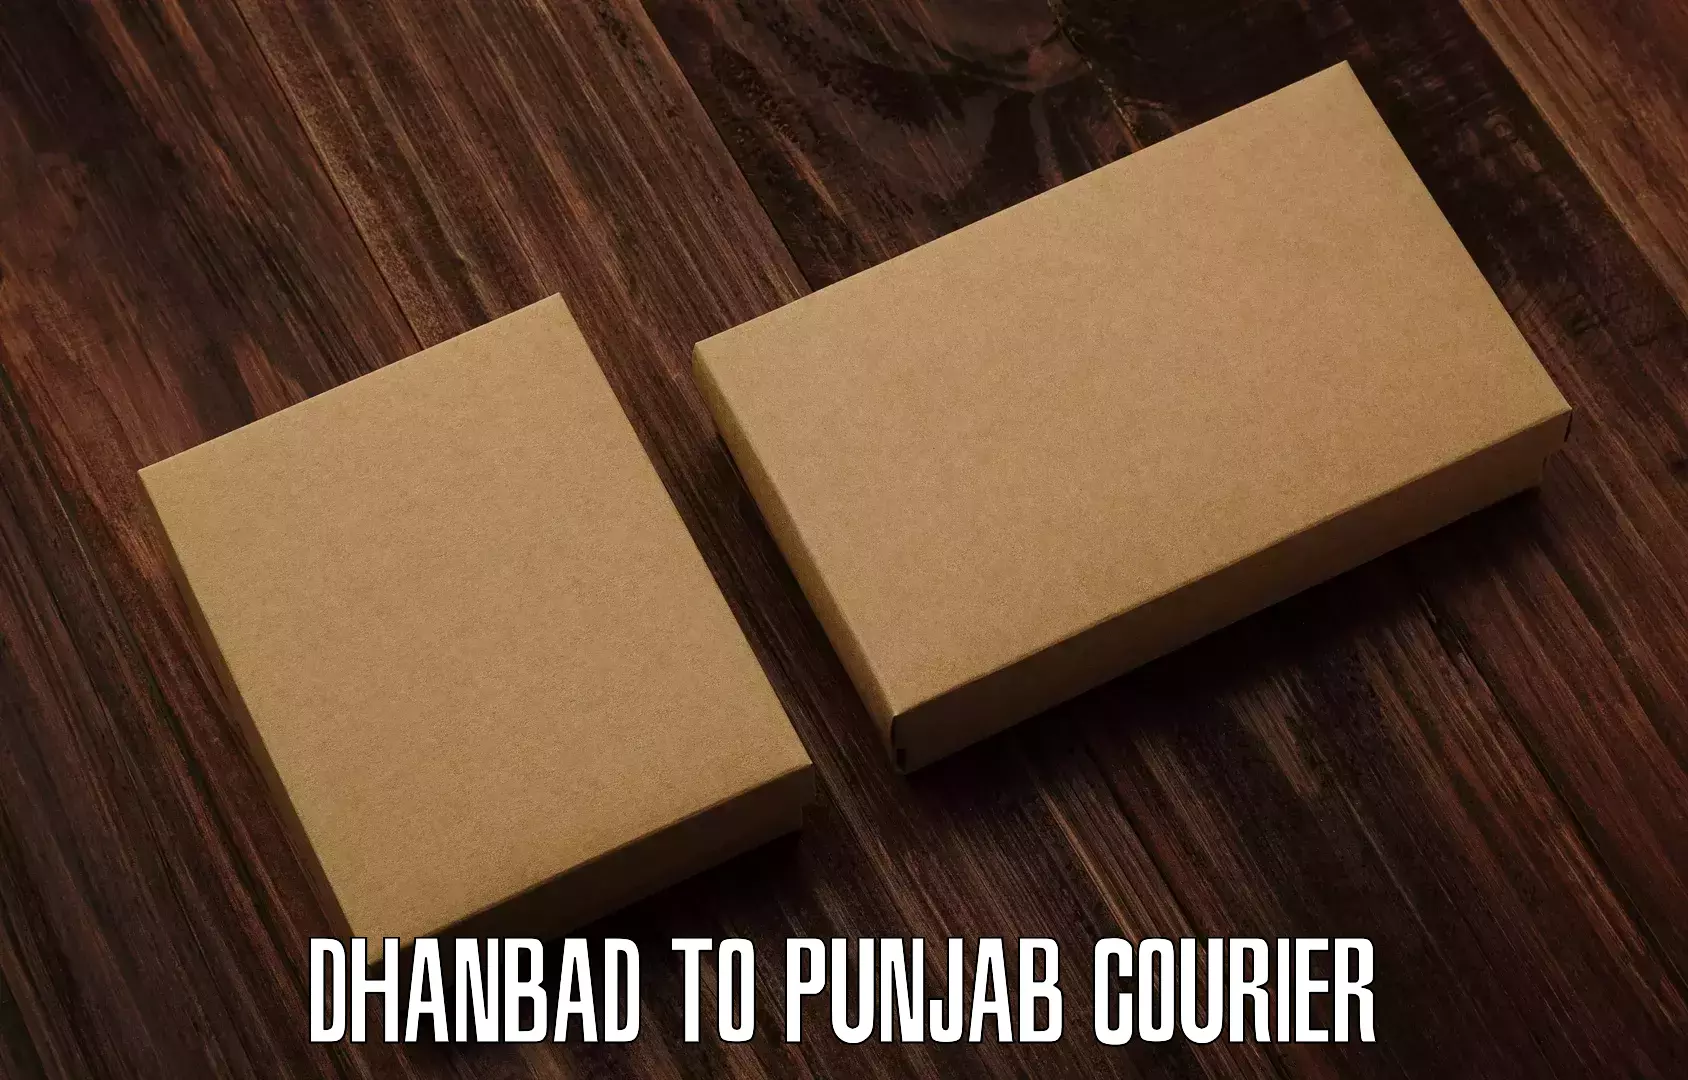 Pharmaceutical courier Dhanbad to Ludhiana